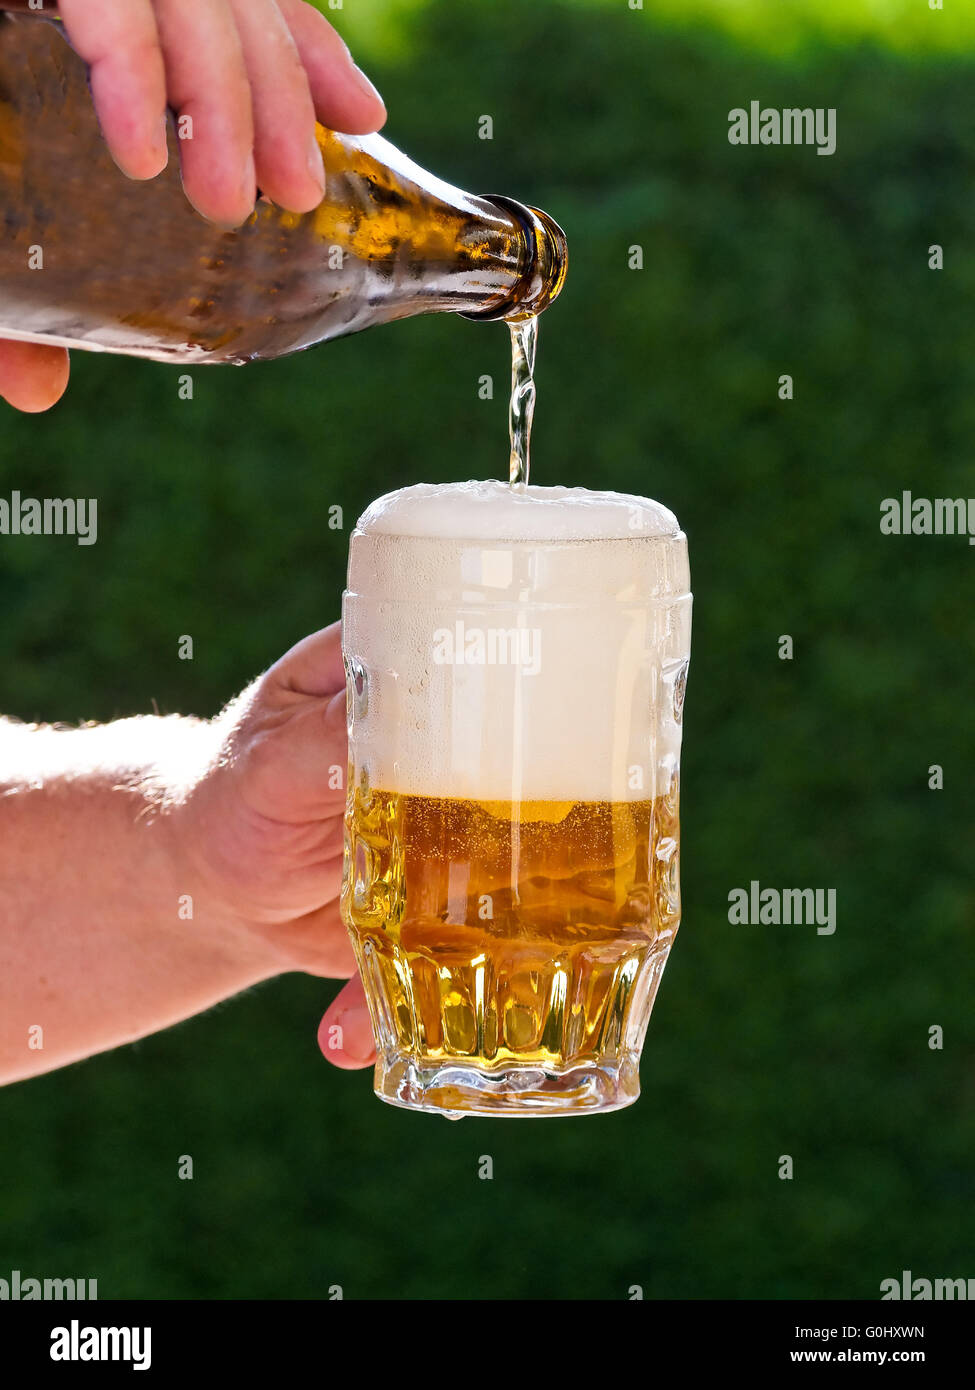 Beer from a beer bottle of beer being poured into glass Stock Photo